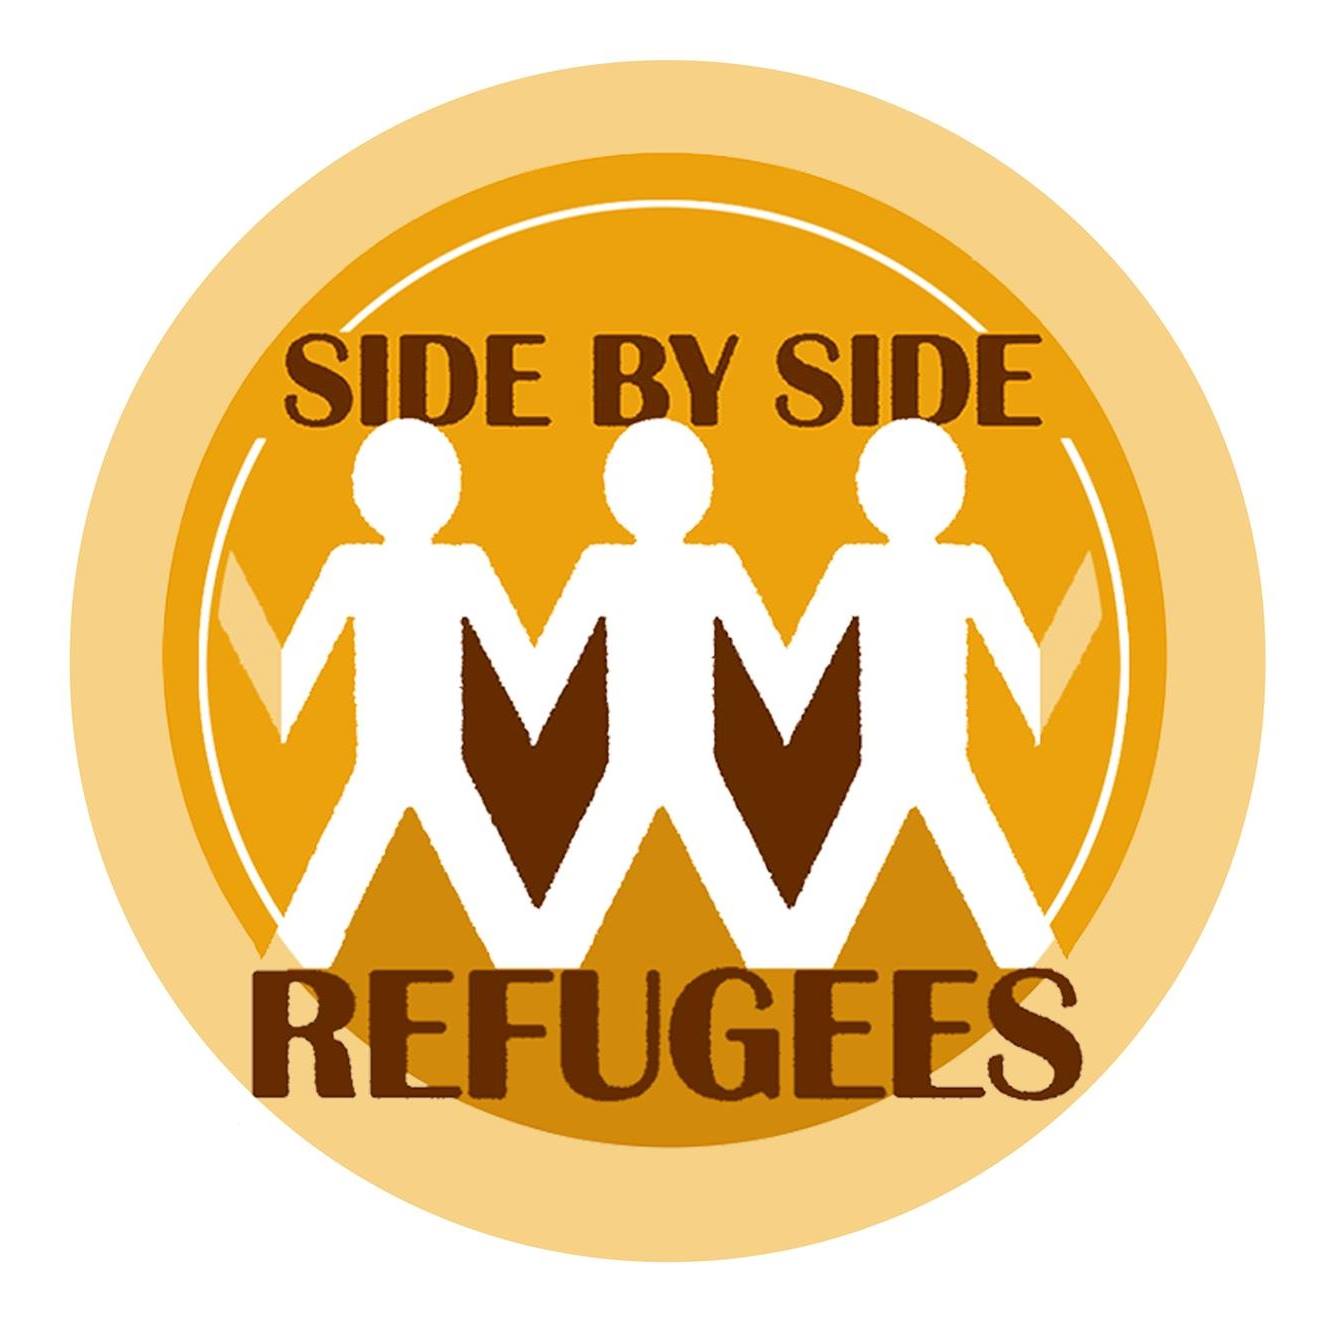 Side by Side Refugees